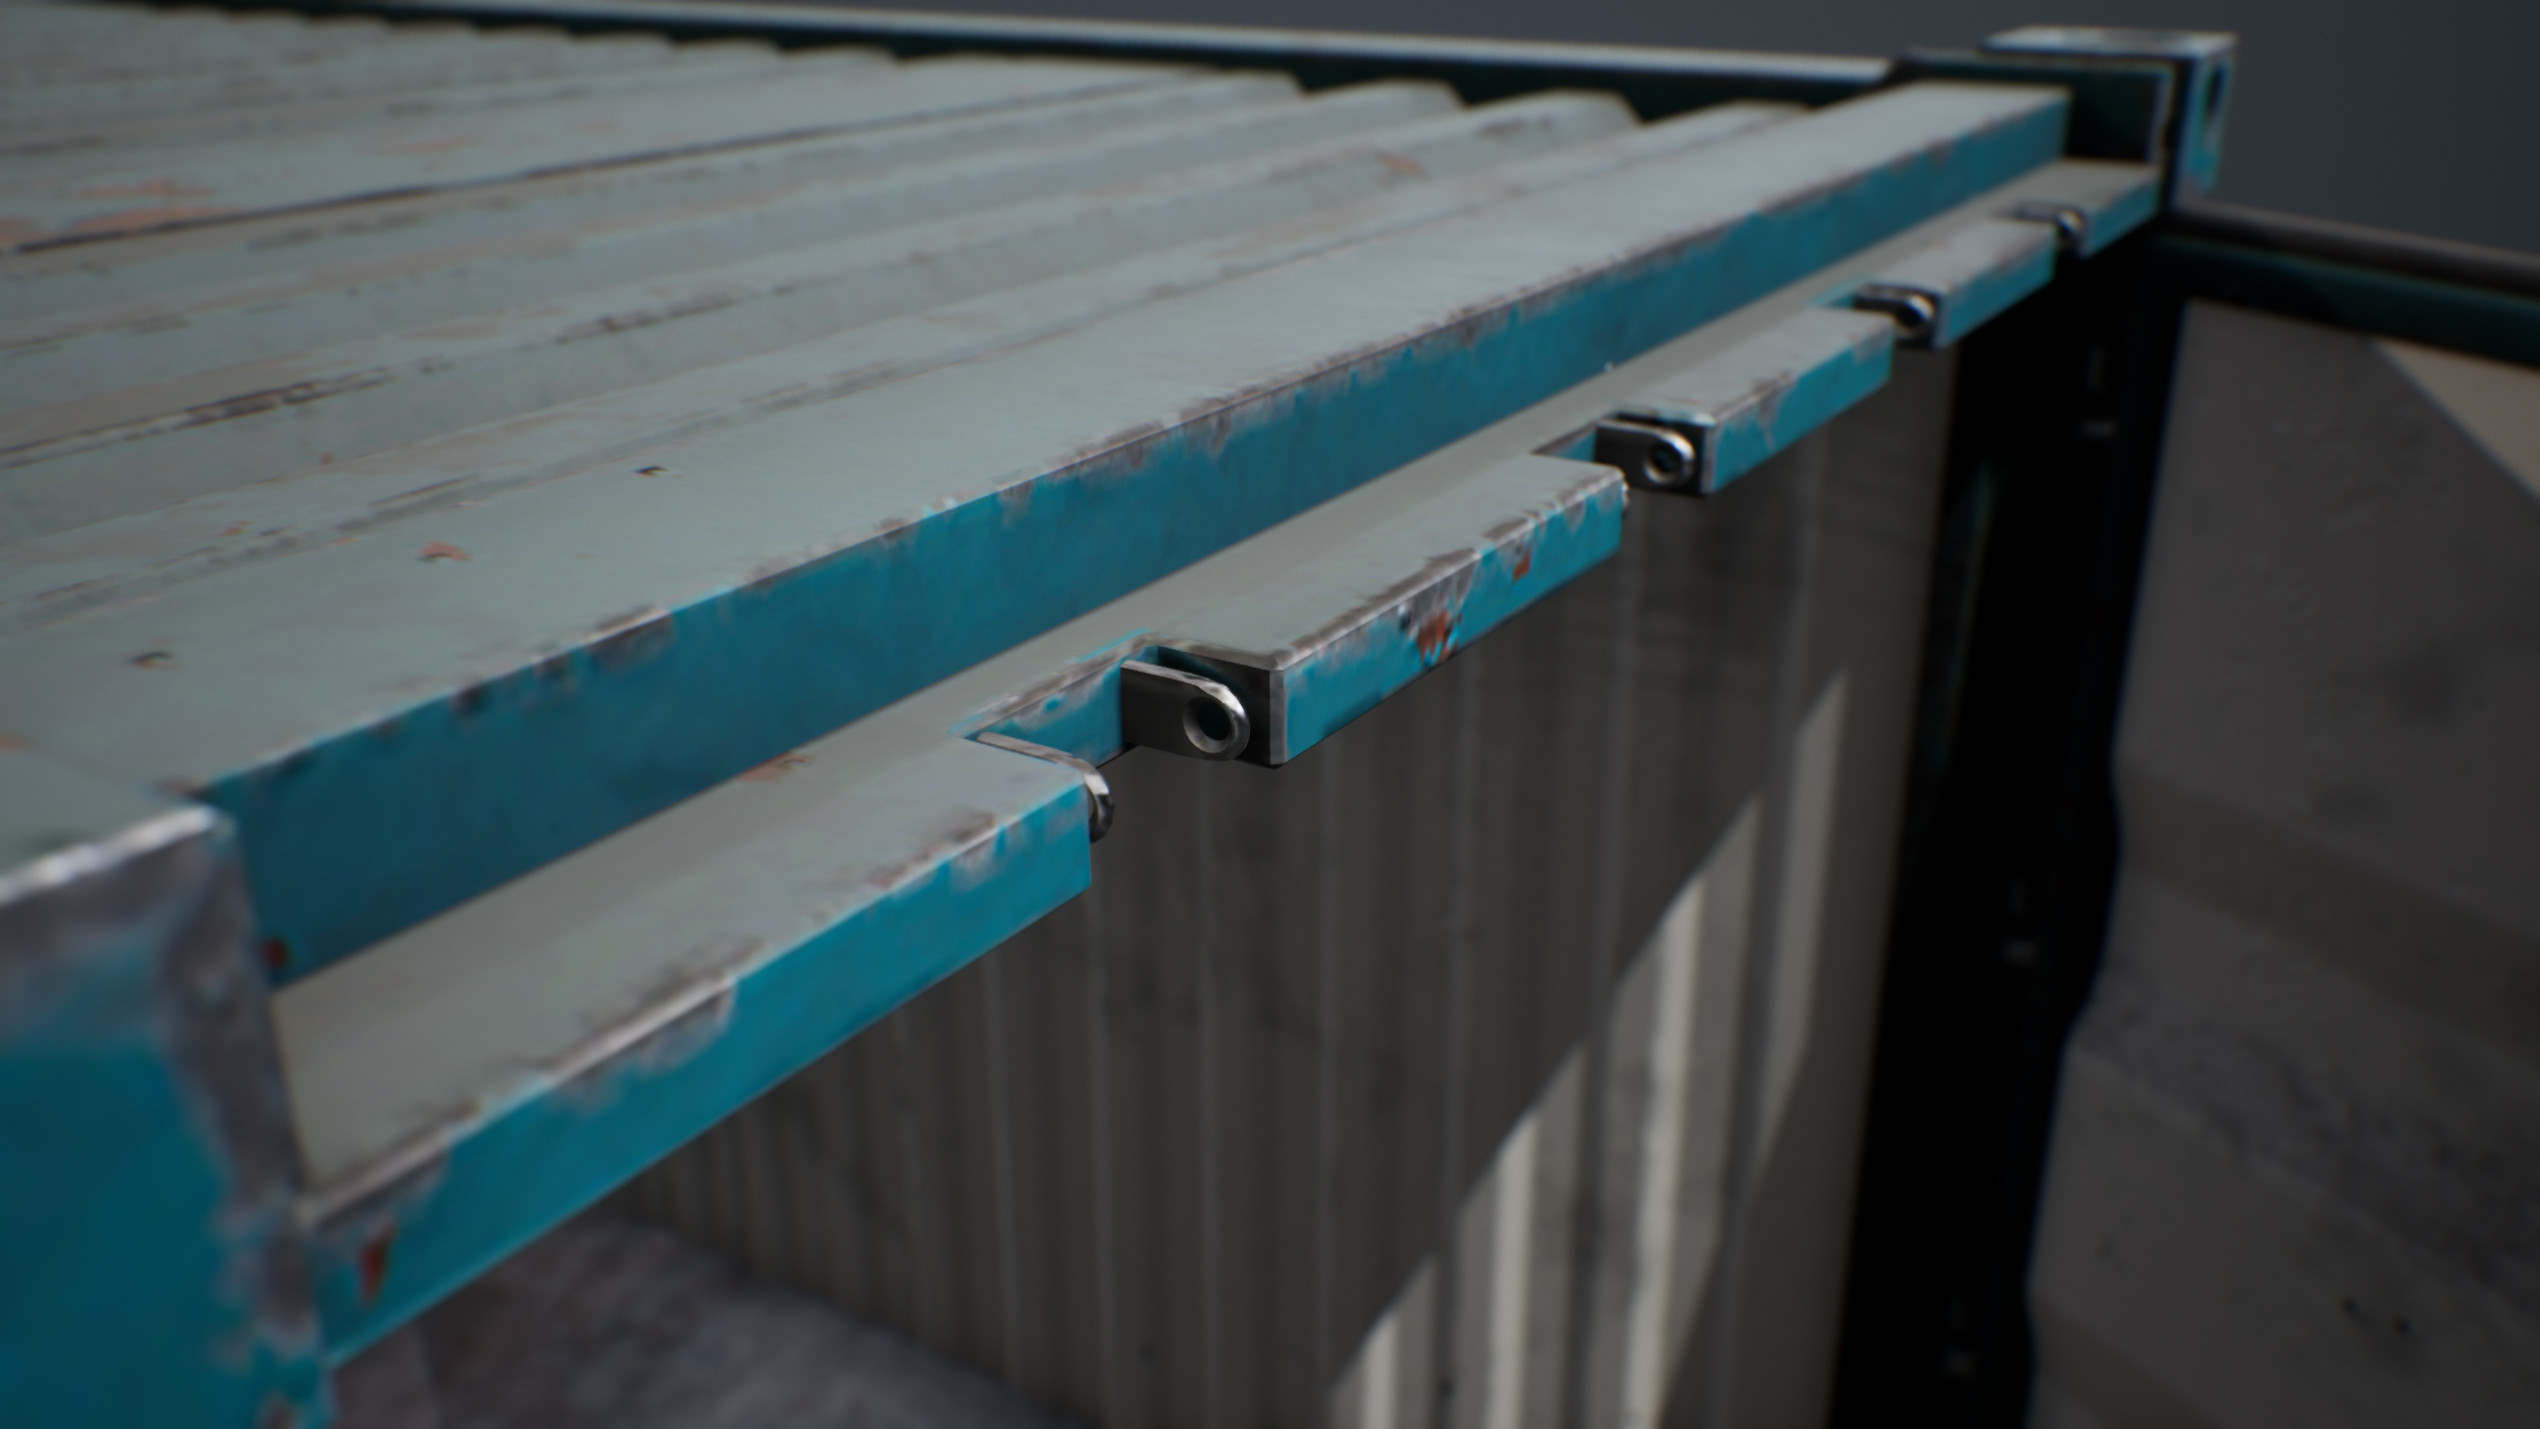 UE4 screenshot detailed shot of the container hinges 3.